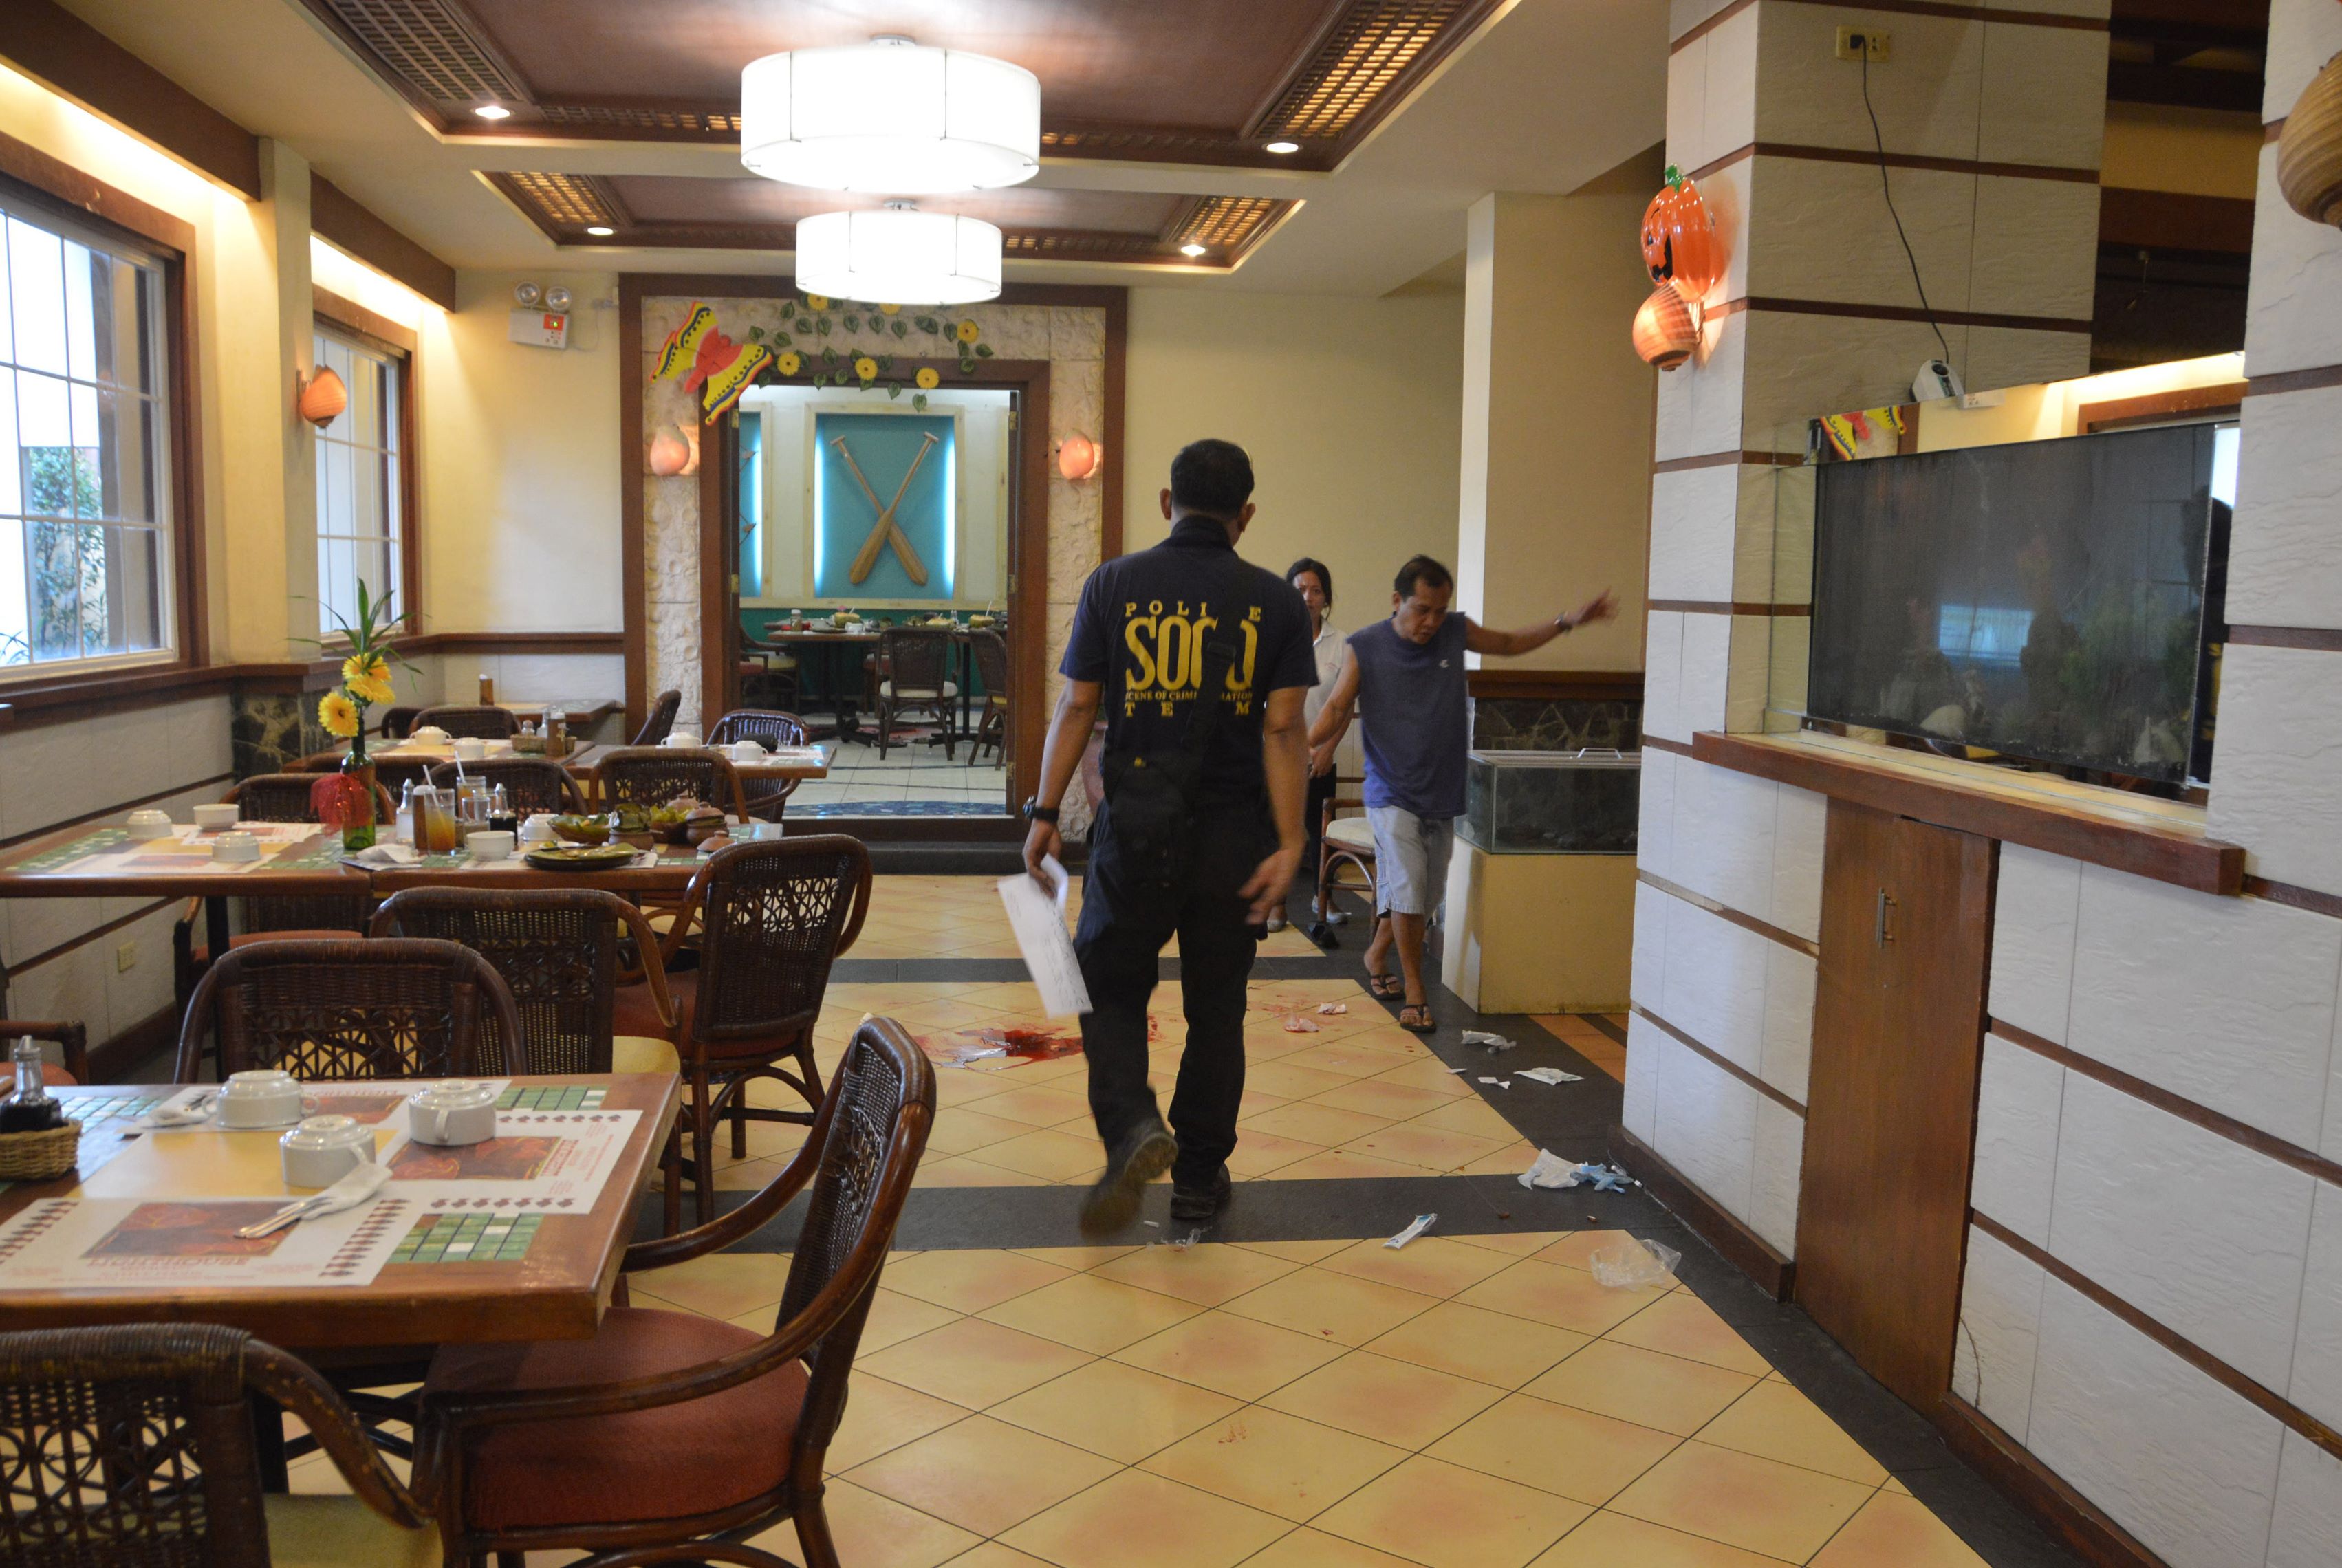 A police investigator inspects the crime scene where Chinese consul general Song Ronghua was wounded after a shooting incident at a restaurant, in Cebu City, central Philippines. Photo: AFP